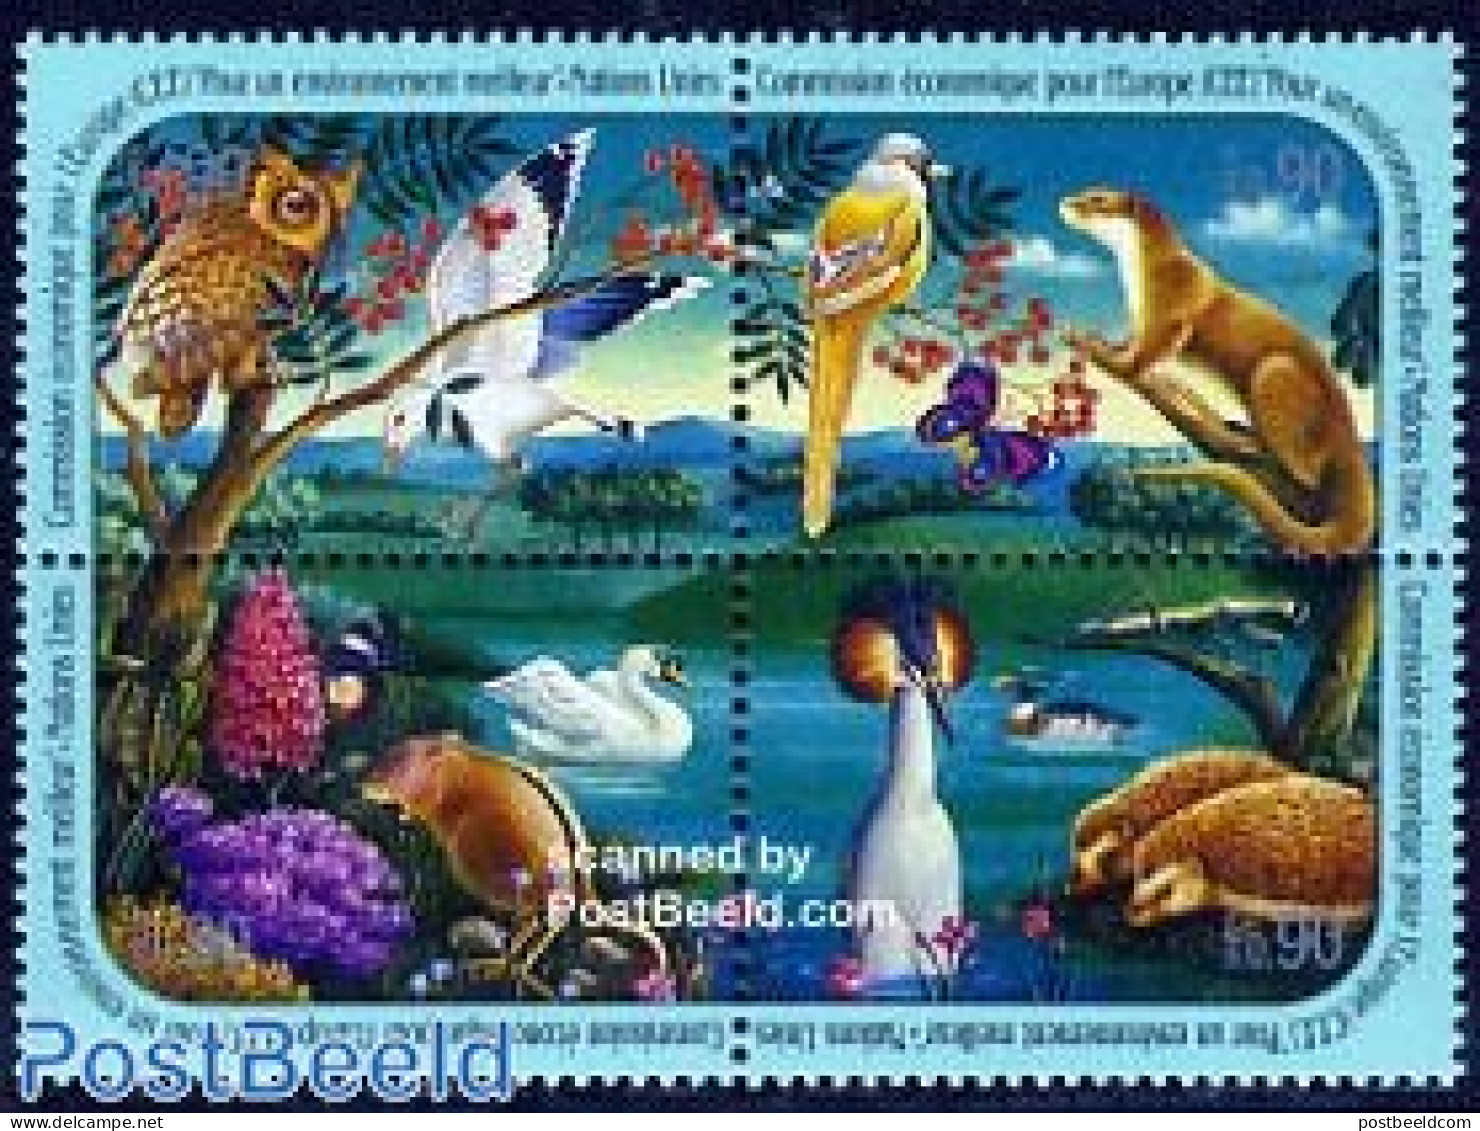 United Nations, Geneva 1991 Environment Protection 4v [+], Mint NH, History - Nature - Europa Hang-on Issues - Animals.. - Idées Européennes